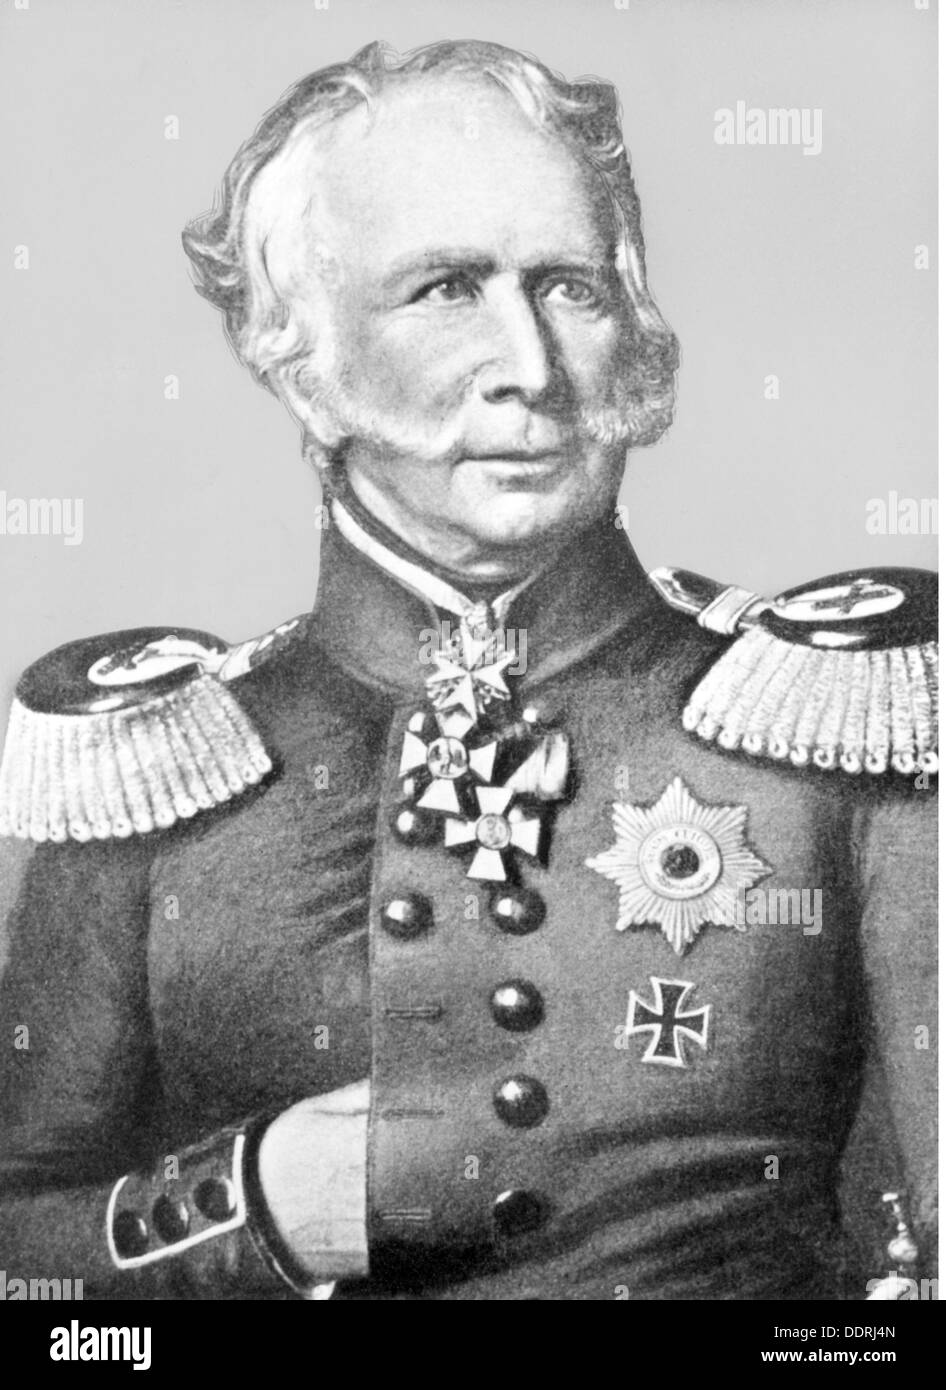 Boyen, Hermann von, 27.7.1771 - 15.2.1848, Prussian general, Minister of War 1814 - 1819 and 1841 - 1847, half length, after painting, 19th century, Stock Photo